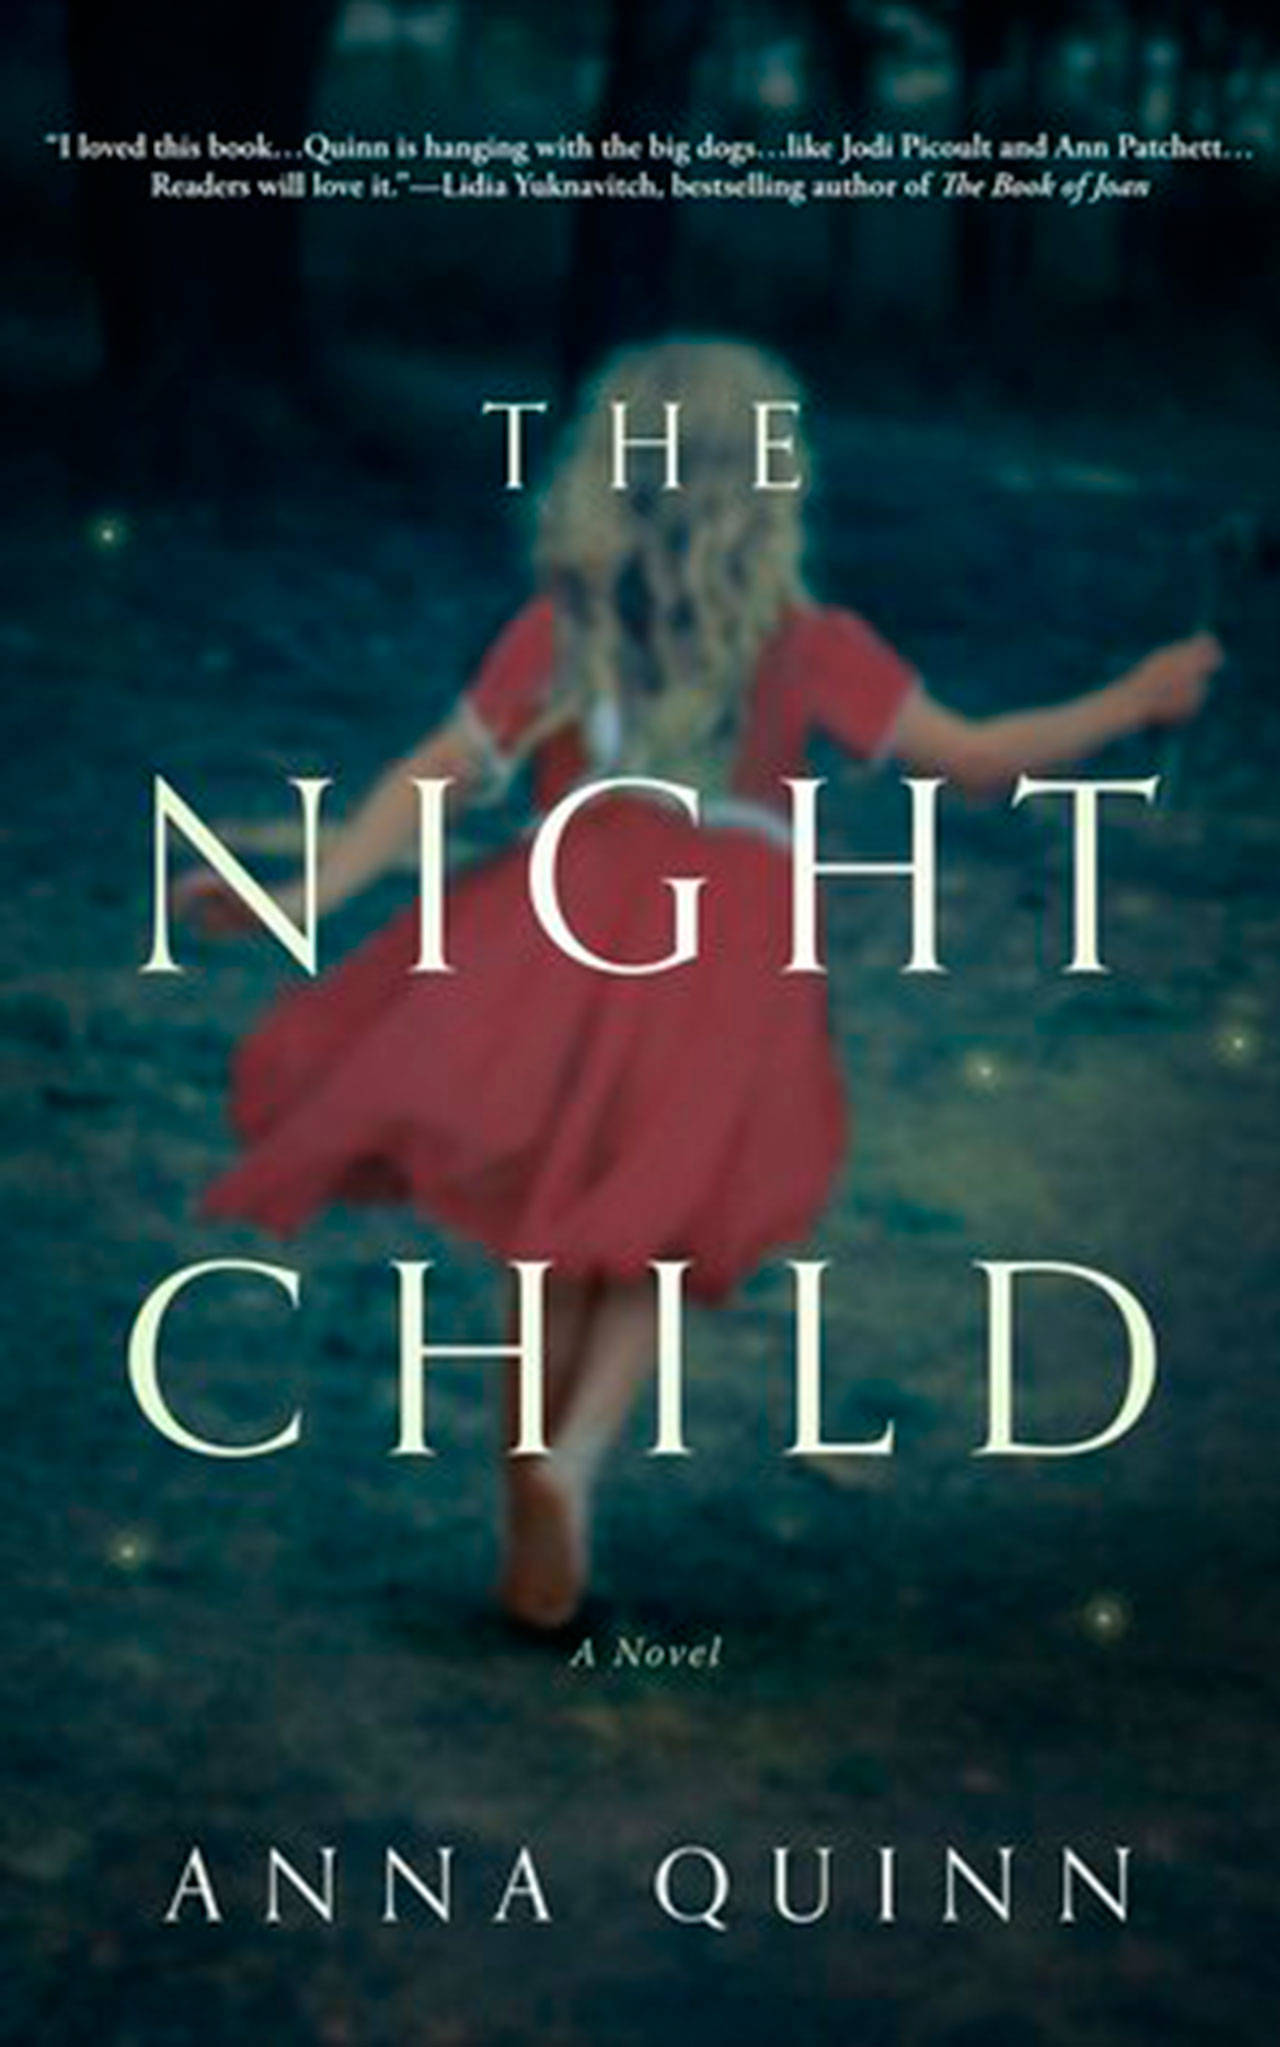 Image courtesy of Eagle Harbor Book Company | Eagle Harbor Book Company will host former Bainbridge Island resident Anna Quinn for a reading of her debut novel, “The Night Child,” at 7 p.m. Sunday, Feb. 18.